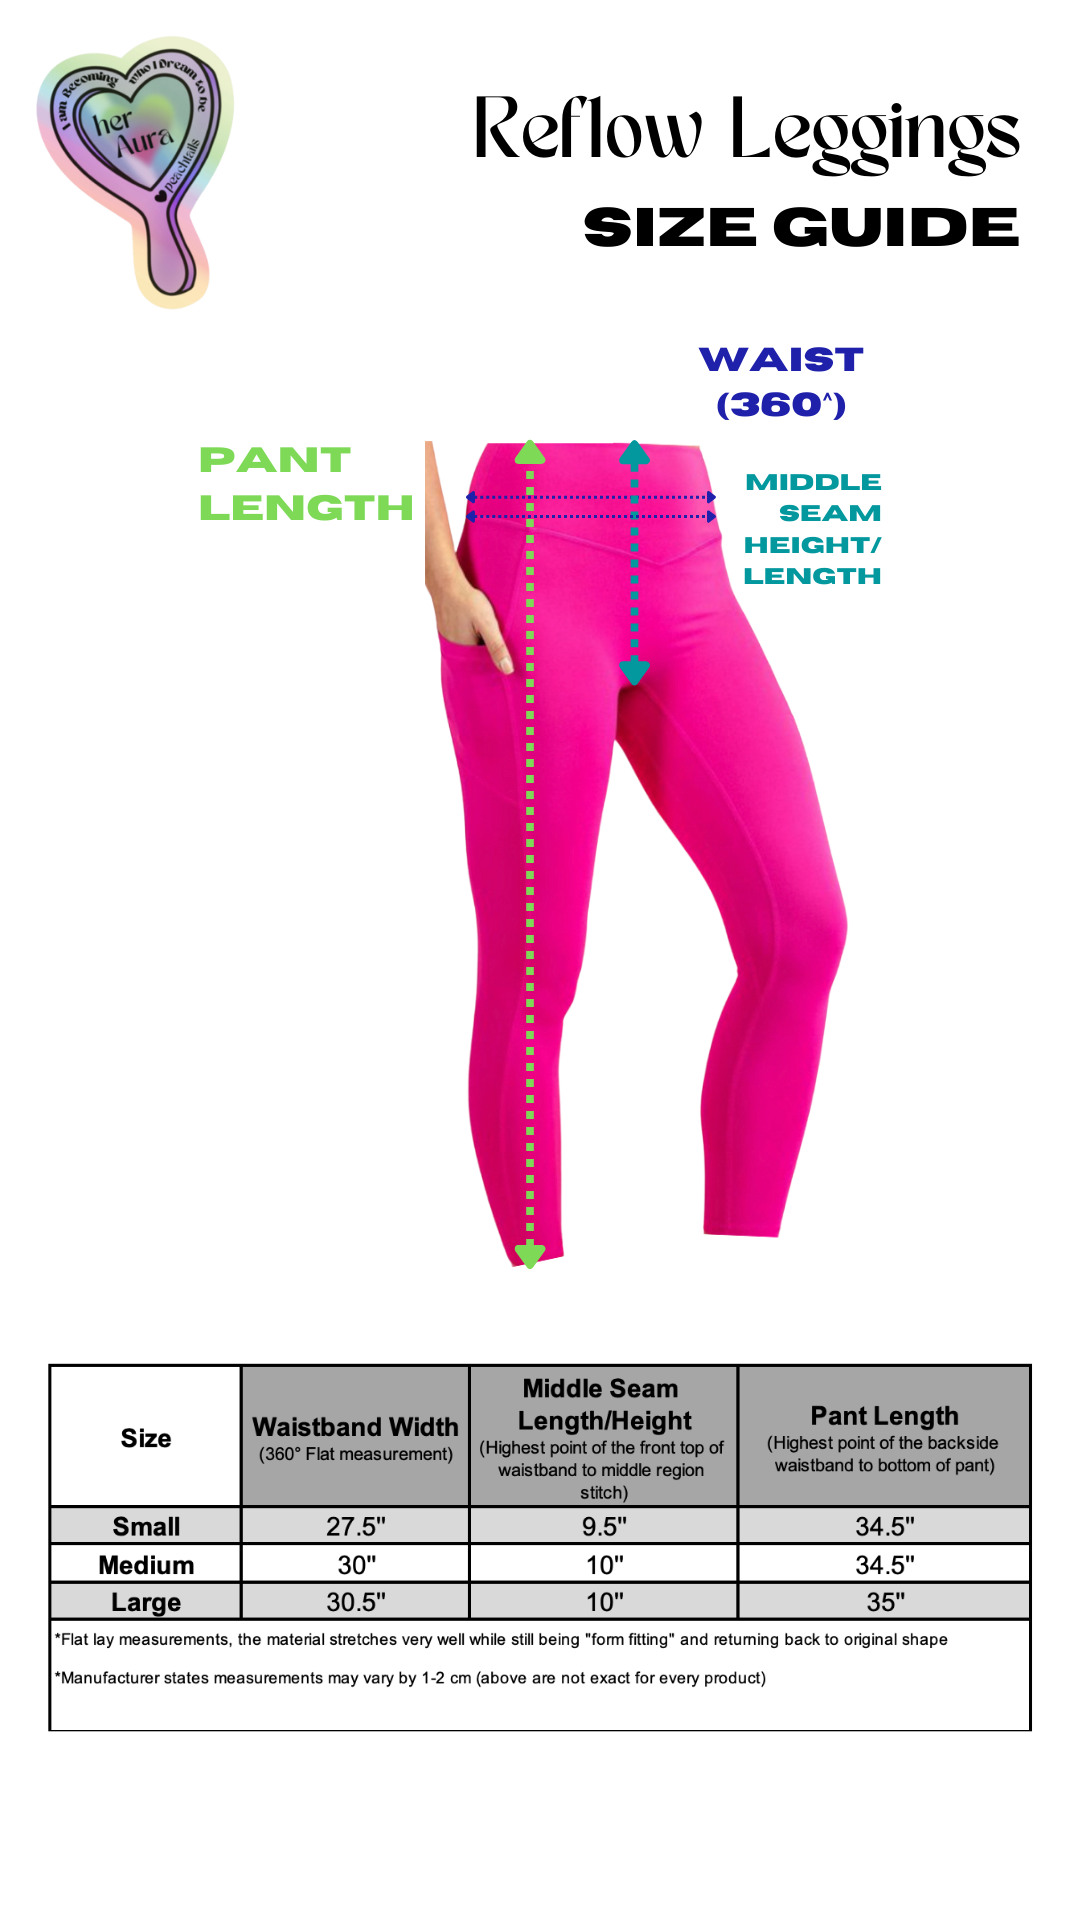 The image is a size guide for "Reflow Leggings," showing a mannequin wearing hot pink leggings with dotted lines indicating how to measure waist (360°), middle seam height, and pant length. Sizes range from Small to Large, with waistband widths from 27.5" to 30.5", middle seam lengths from 9.5" to 10", and pant lengths from 34.5" to 35". A note indicates the material is very stretchy, with a disclaimer about potential measurement variations.